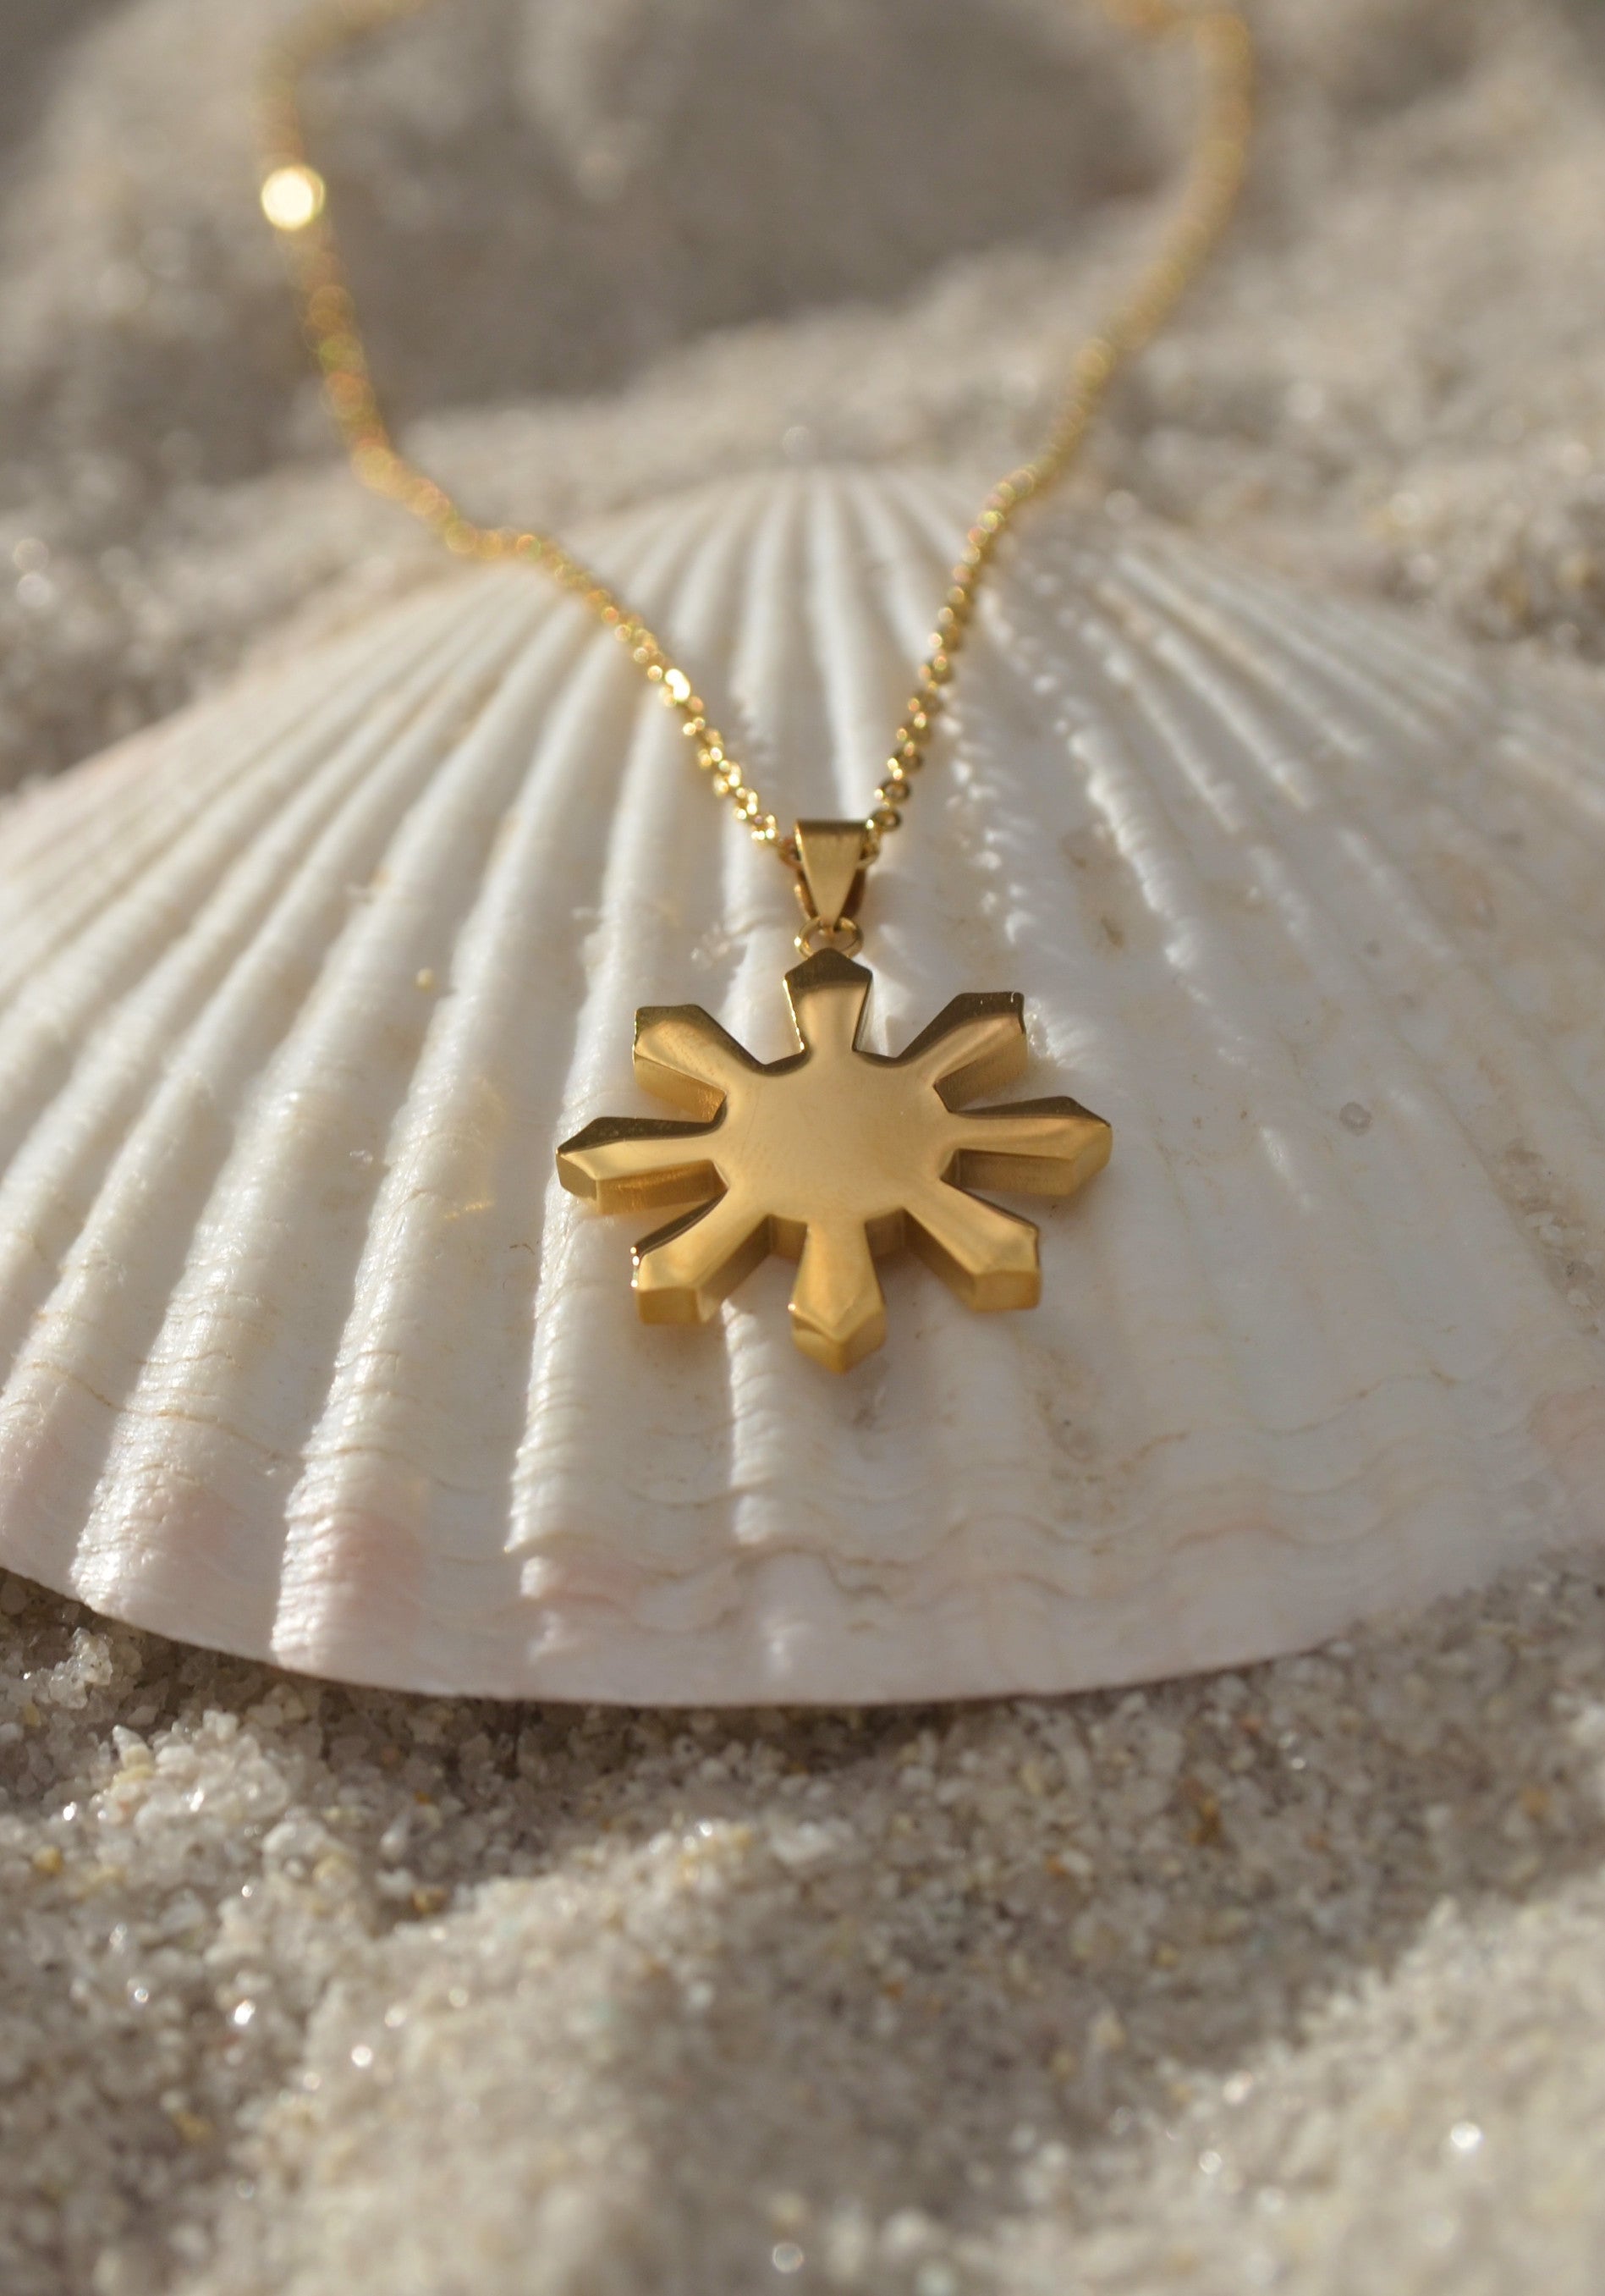 Buy 14k Gold Plated Sun Pendant Chain Necklace Handmade Minimalist Dainty  Tiny Gear Charm Jewelry Online in India - Etsy